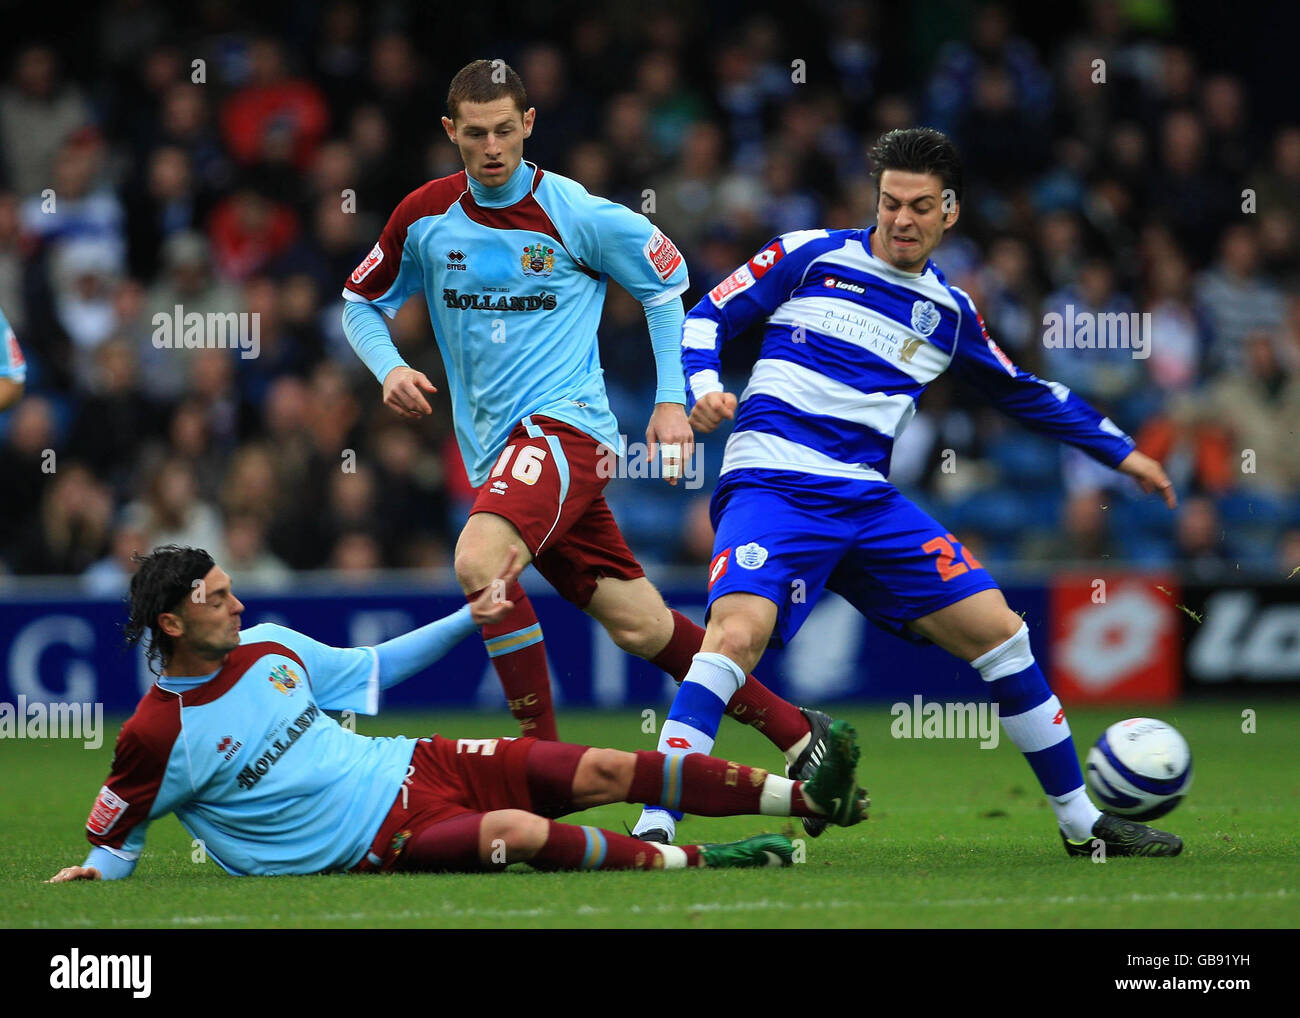 Queens Park Rangers' Samuel Di Carmine and Burnley's Chris Eagles battle for the ball during the Coca-Cola Football Championship match at Loftus Road, London. Stock Photo